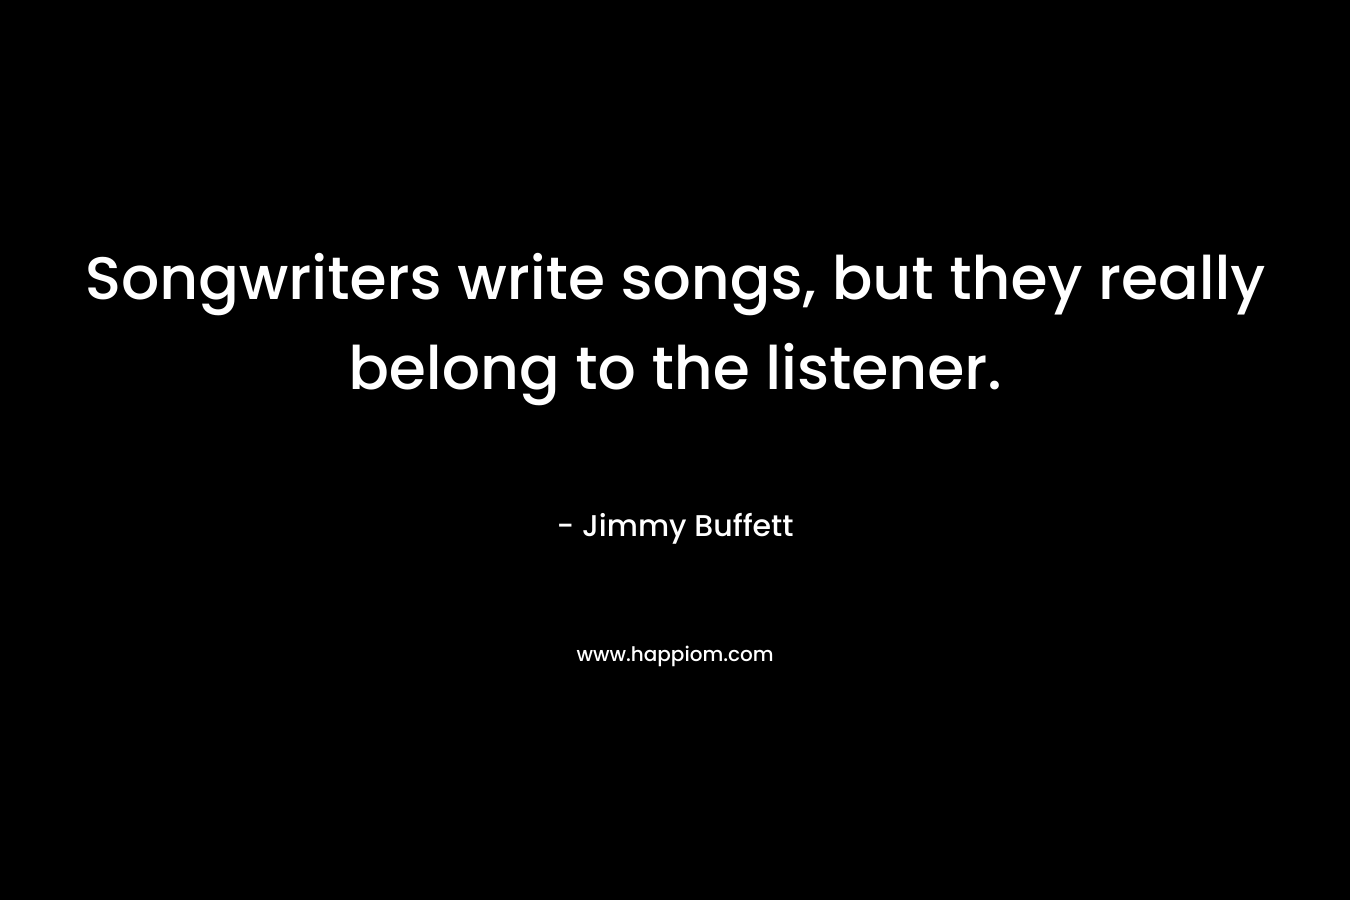 Songwriters write songs, but they really belong to the listener.